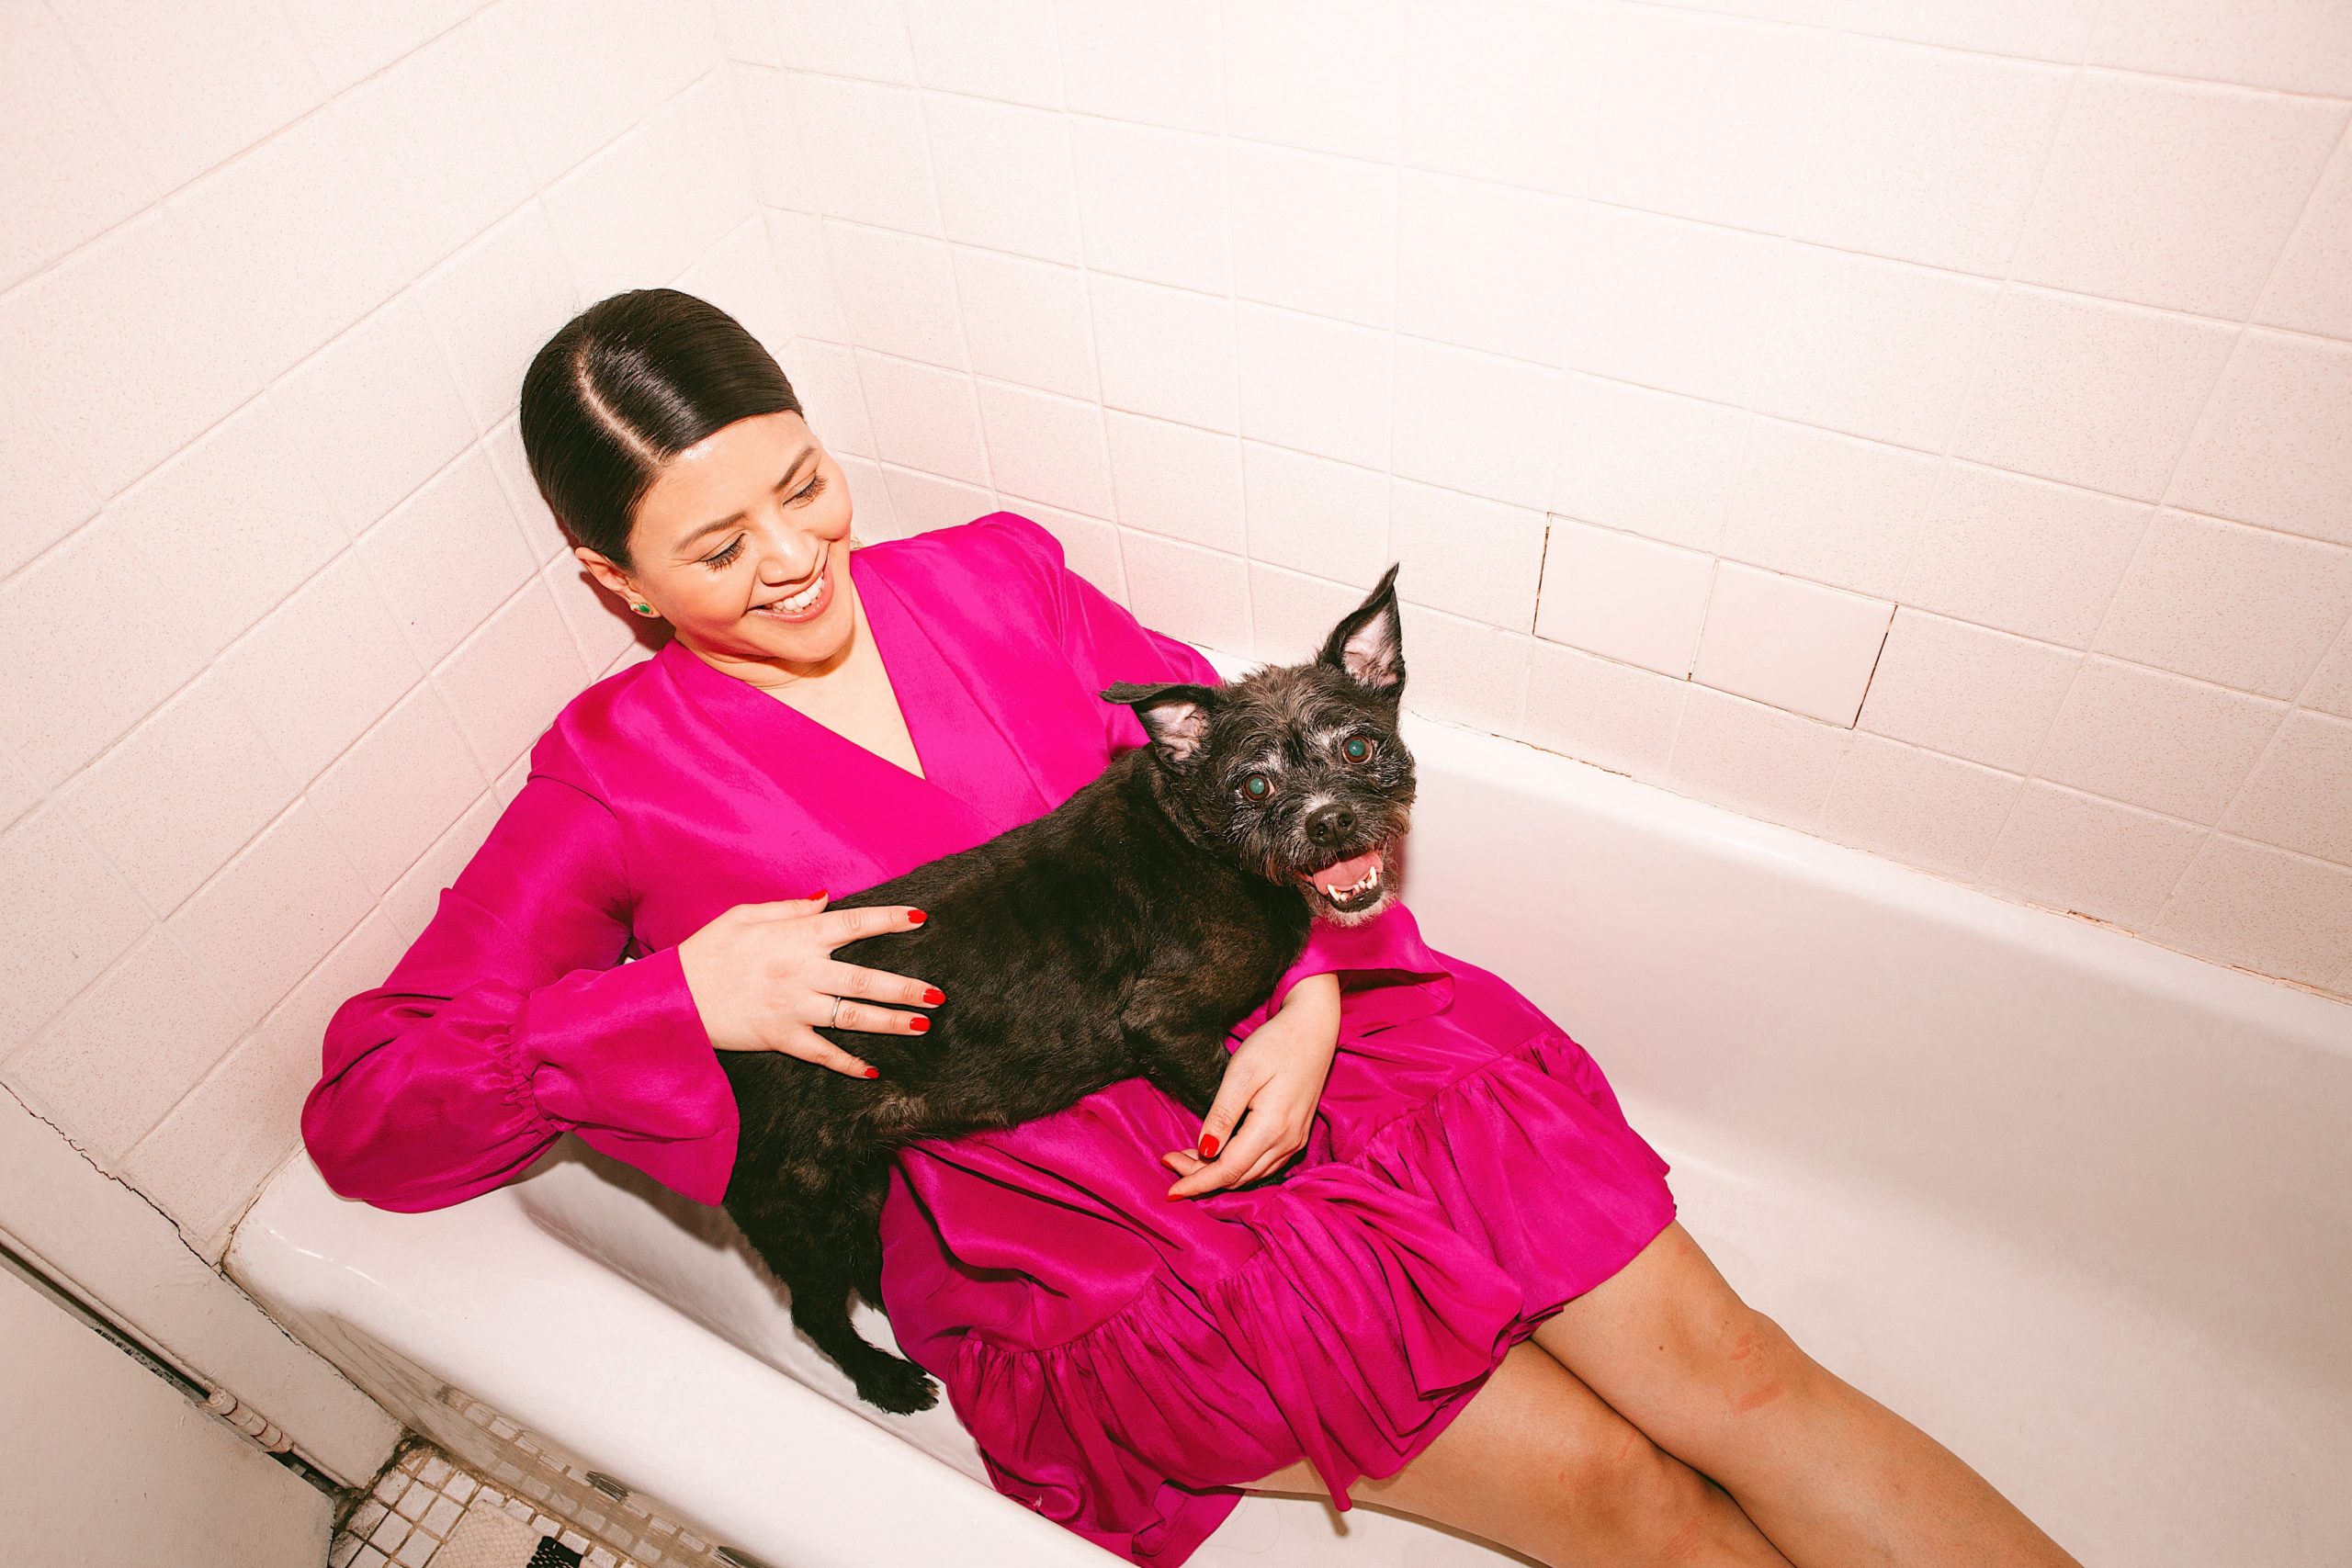 Lisa Lu and her dog, Stella, for Argos & Artemis by Tayler Smith.